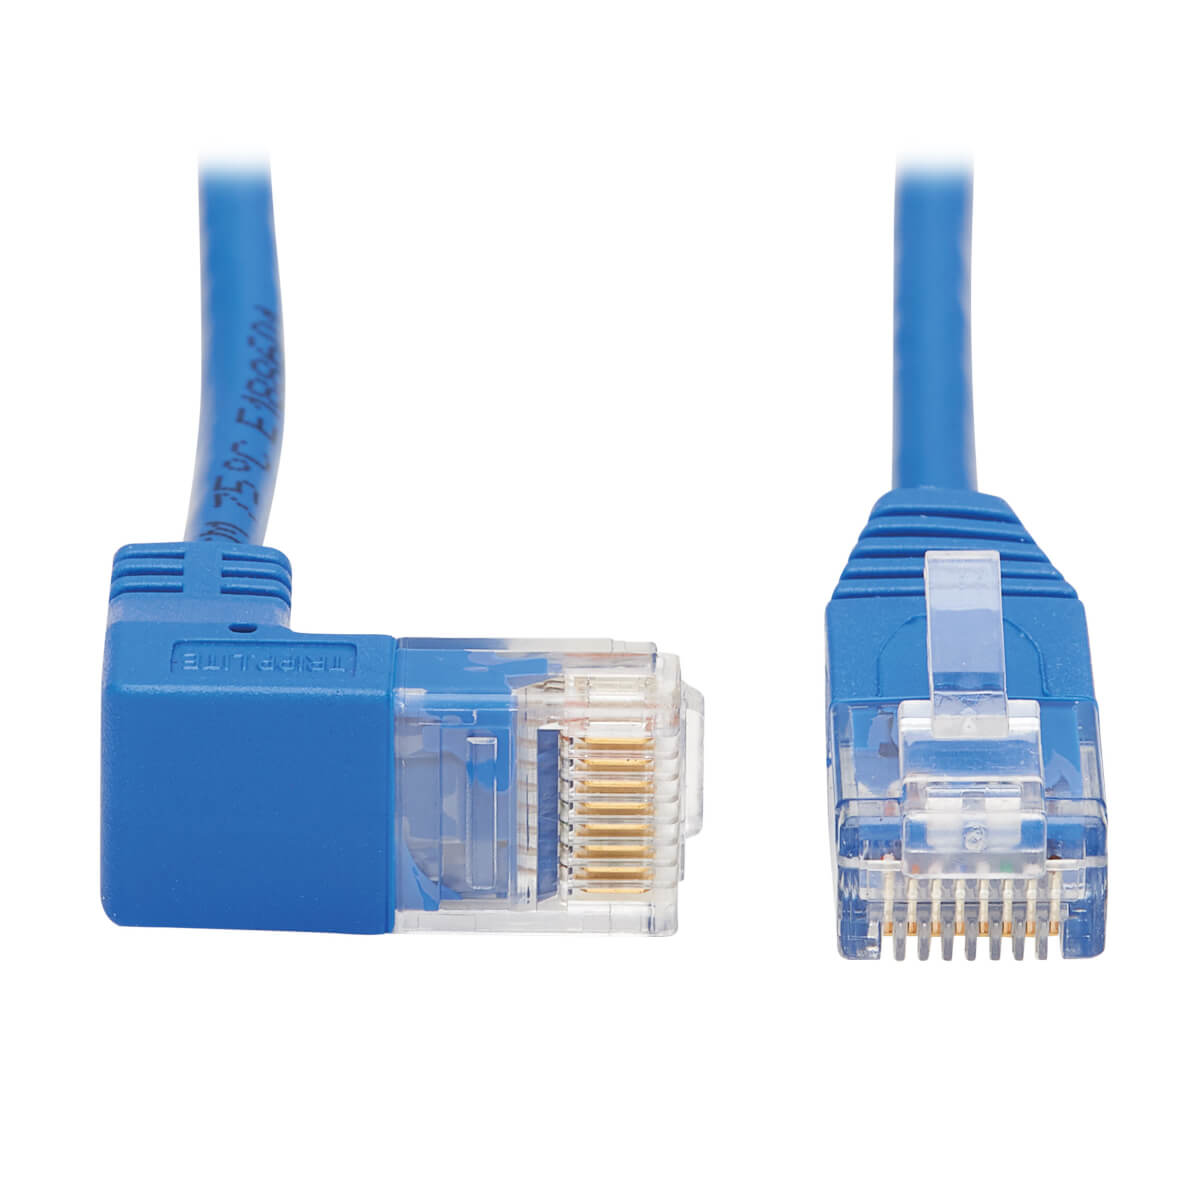 Blue Tripp Lite CAT6 Snagless Patch Cable 7 ft 